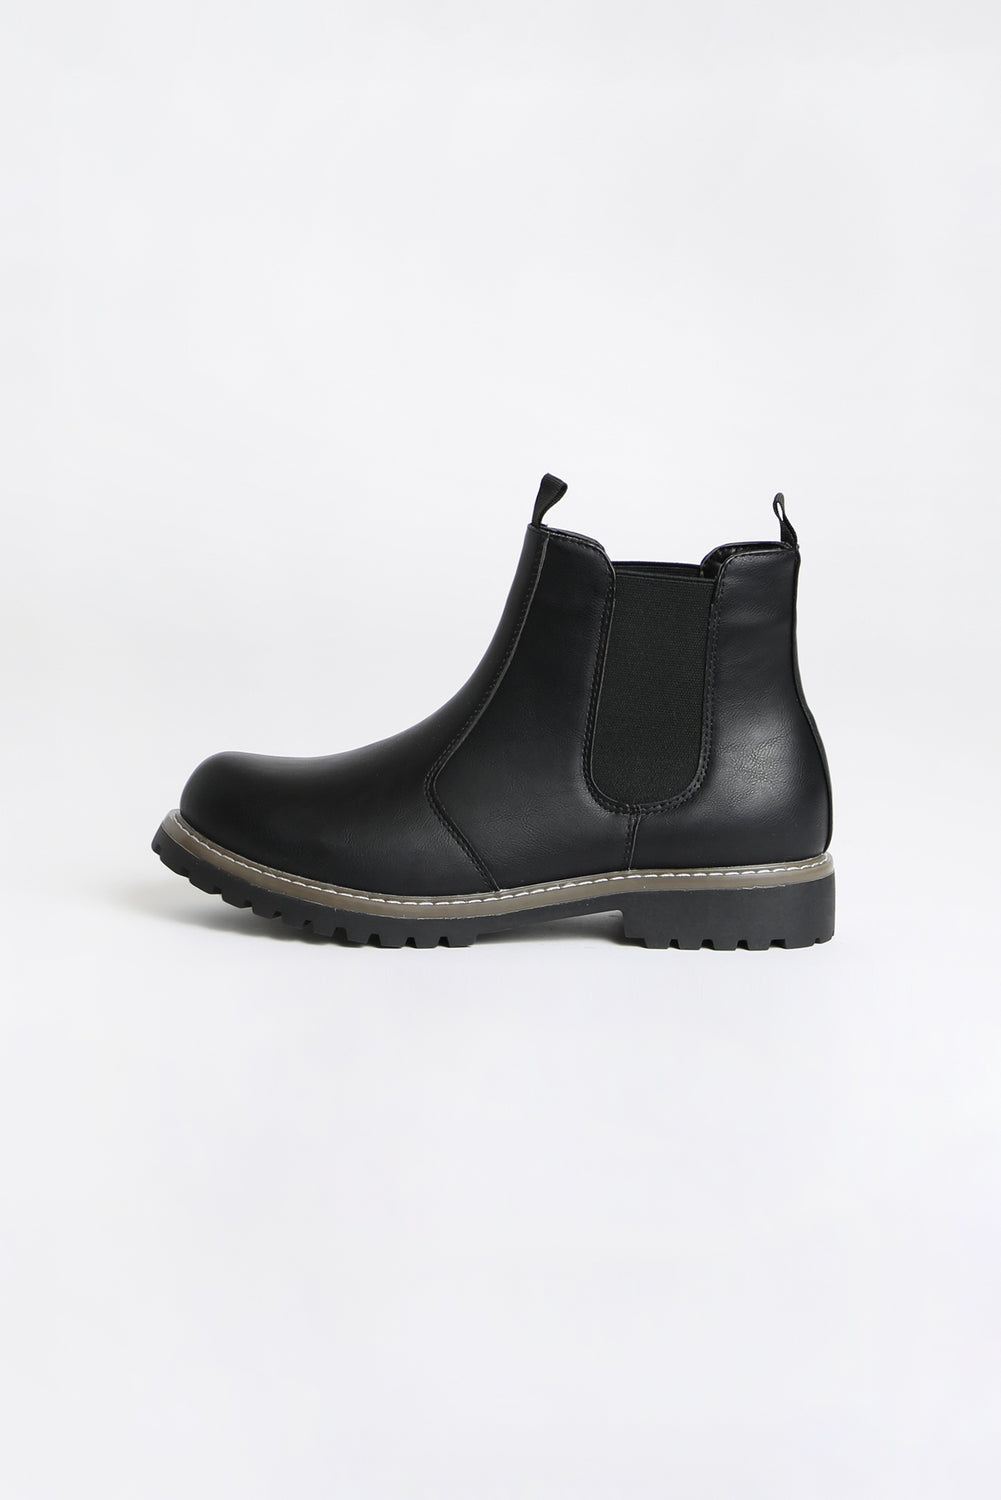 Youth Faux Fur Lined Chelsea Boots Youth Faux Fur Lined Chelsea Boots